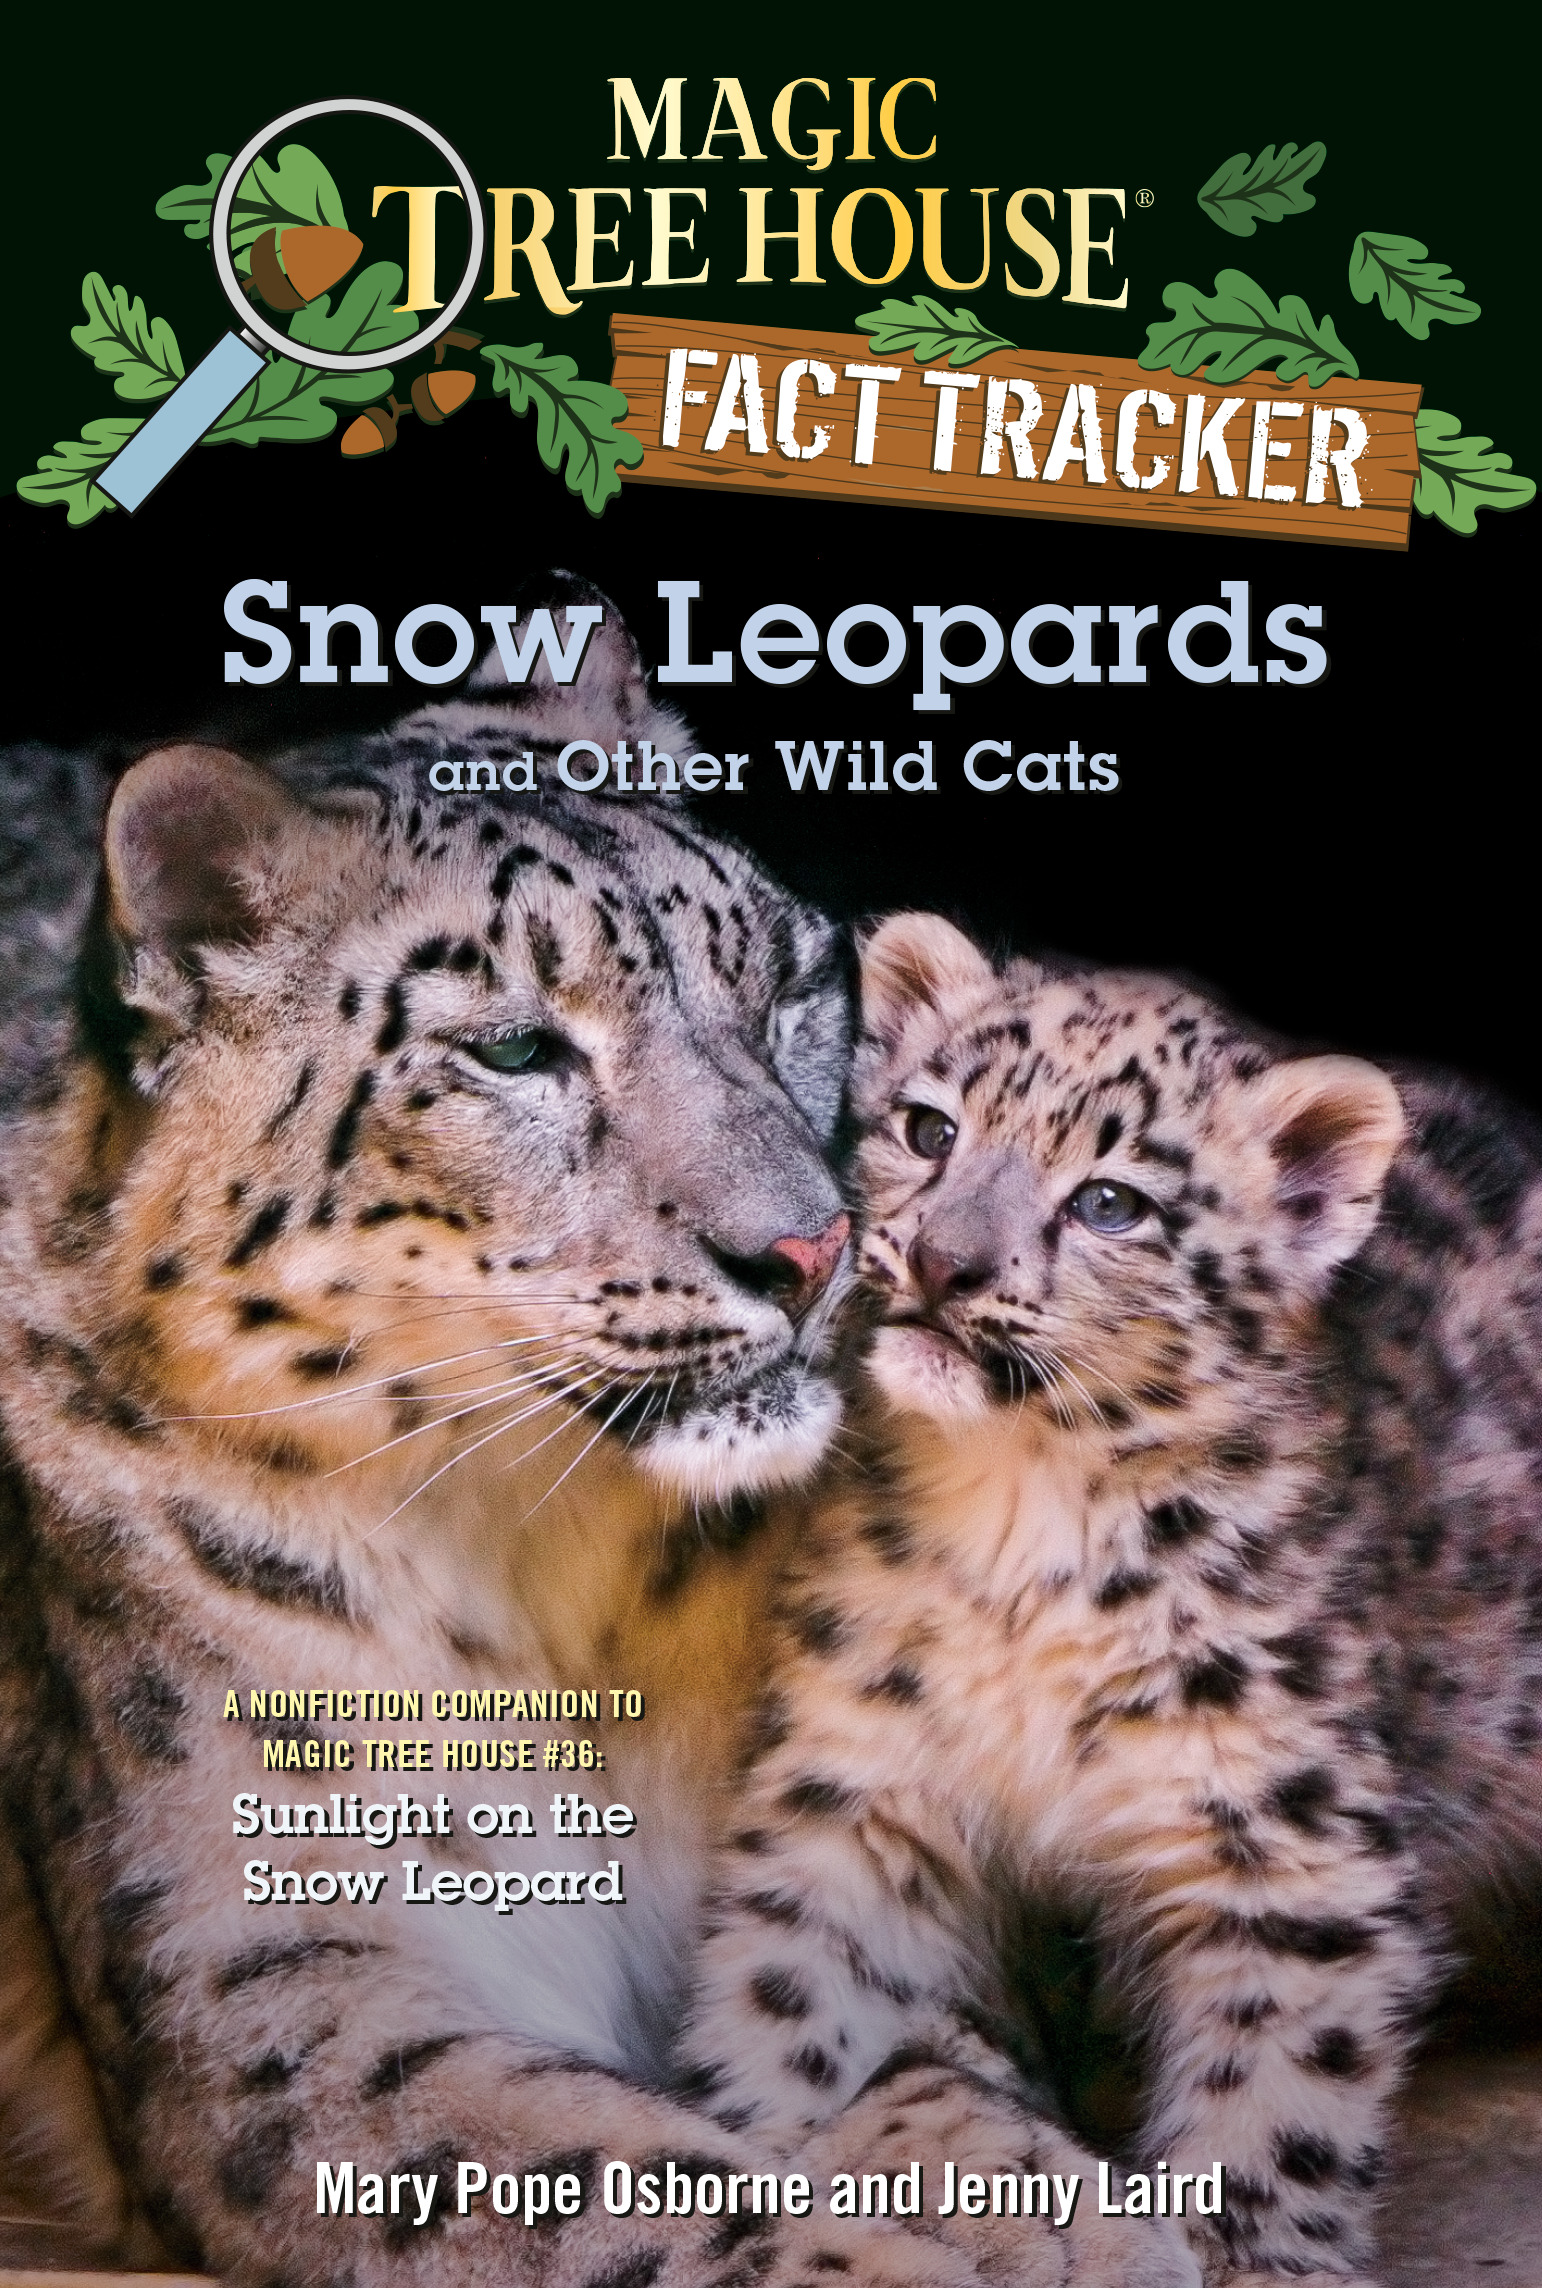 Snow Leopards and Other Wild Cats | Documentary